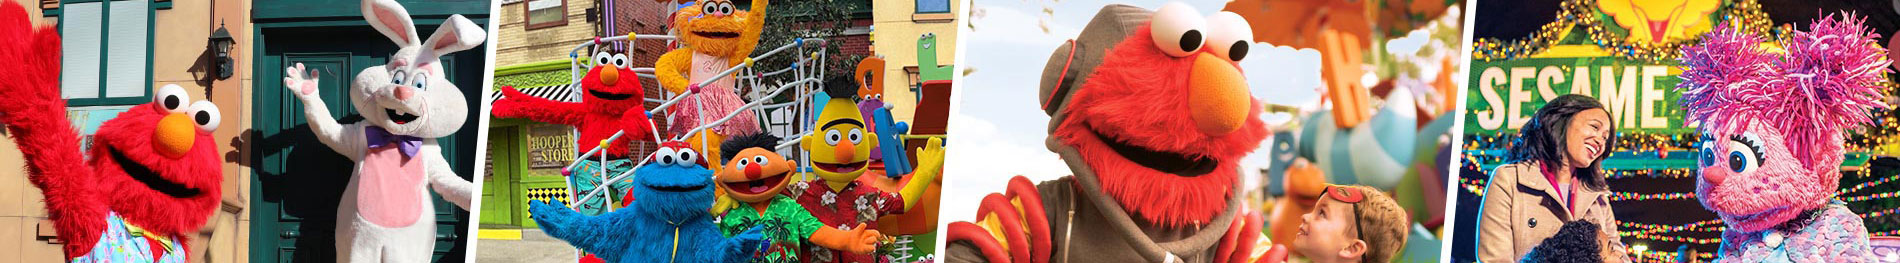 Seasonal events at Sesame Place